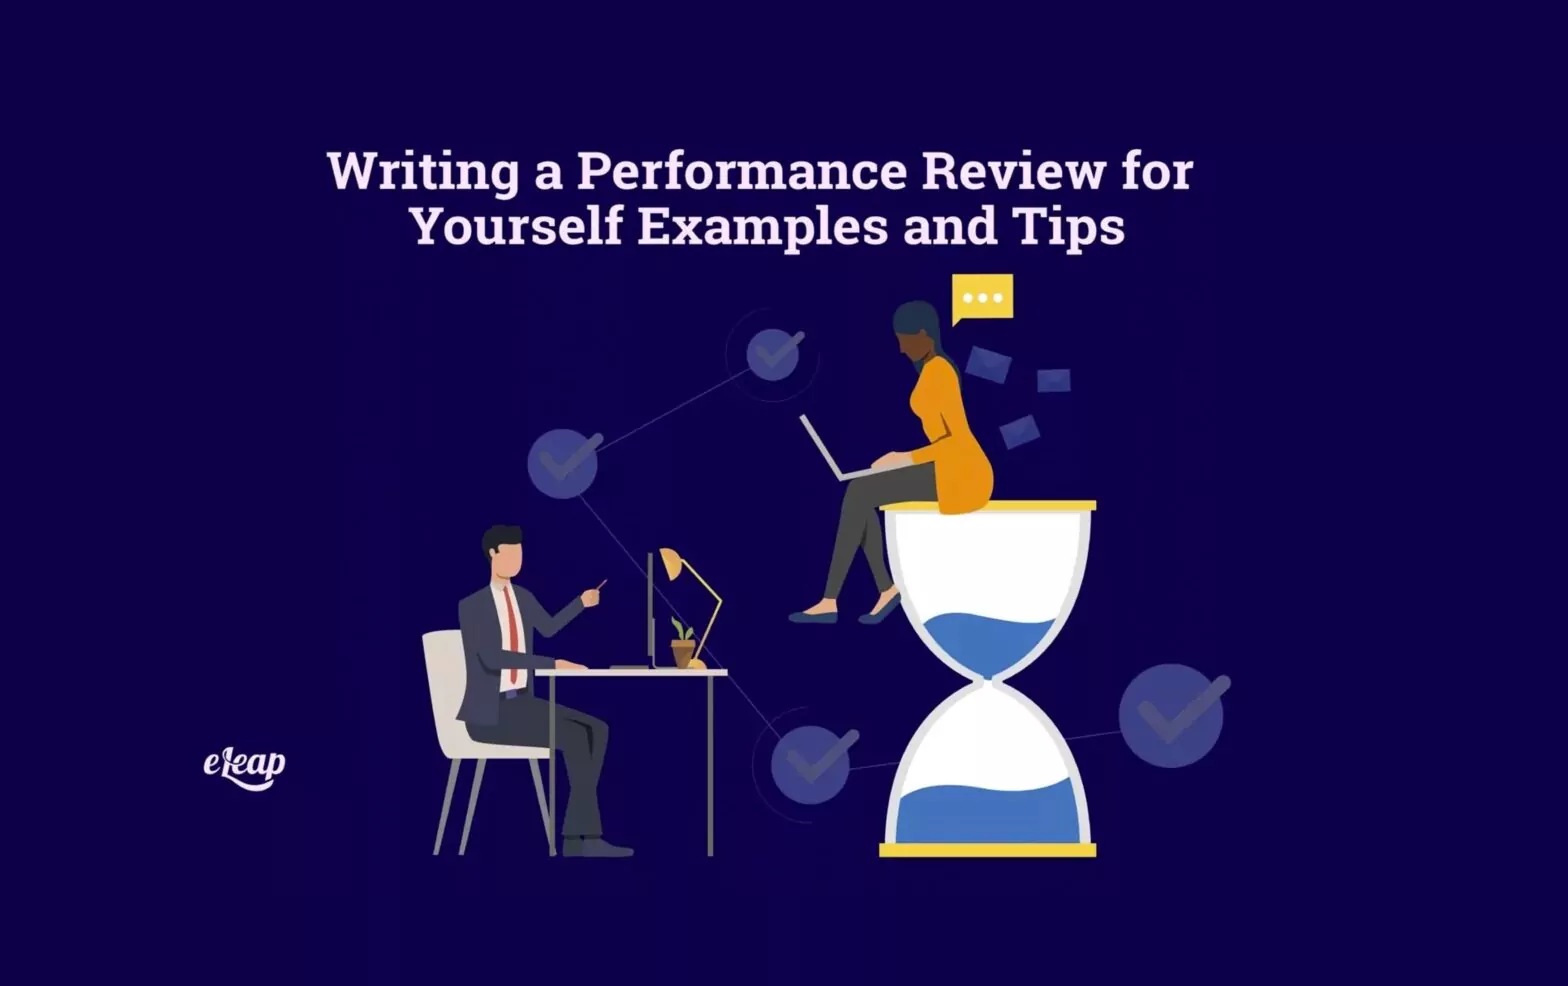 Writing a Performance Review for Yourself Examples and Tips